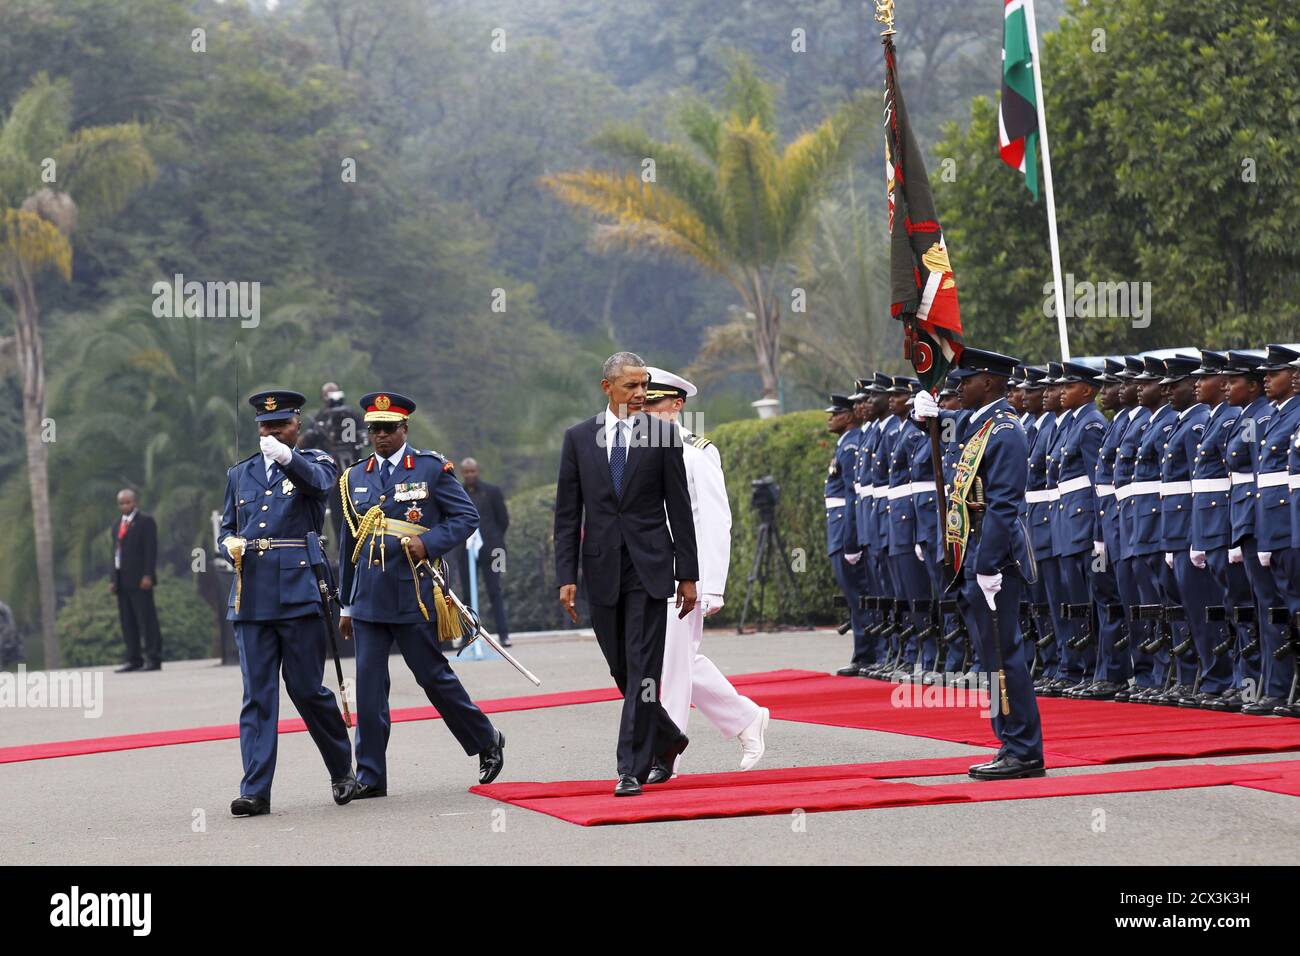 U.S. President Barack Obama reviews a Kenya Defence Forces honour guard during a visit to the State House in Kenya's capital Nairobi, July 25, 2015. REUTERS/Thomas Mukoya Stock Photo